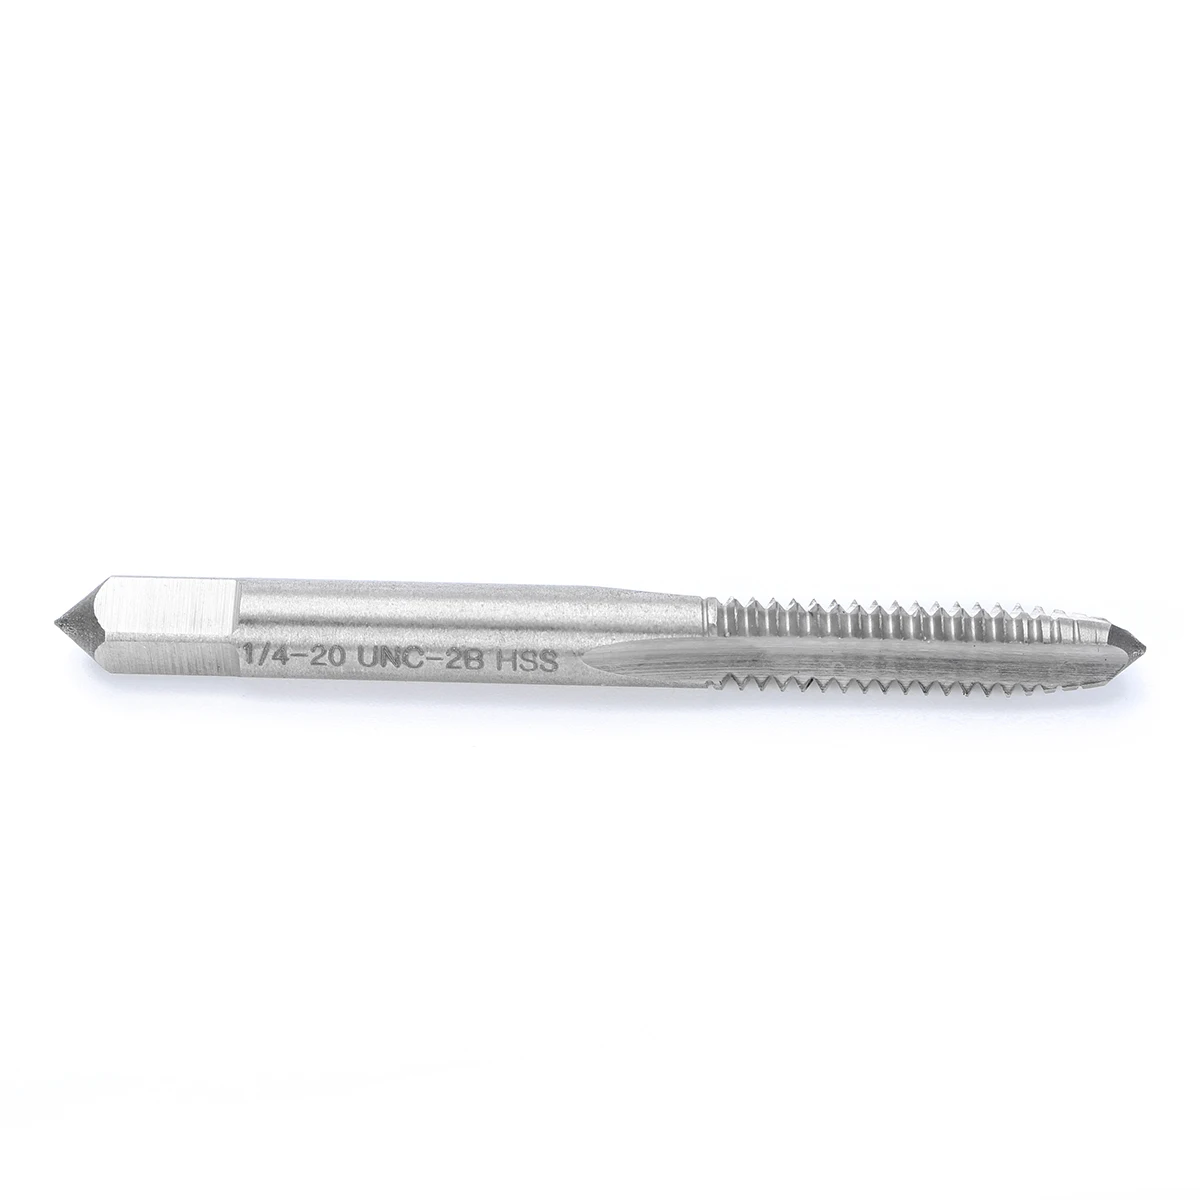 HSS Thread Tap Tapping Tool 1/4-20 UNC-2B Right Hand Thread Drill Screw Tap Spiral Point Straight Flute For Power Tools